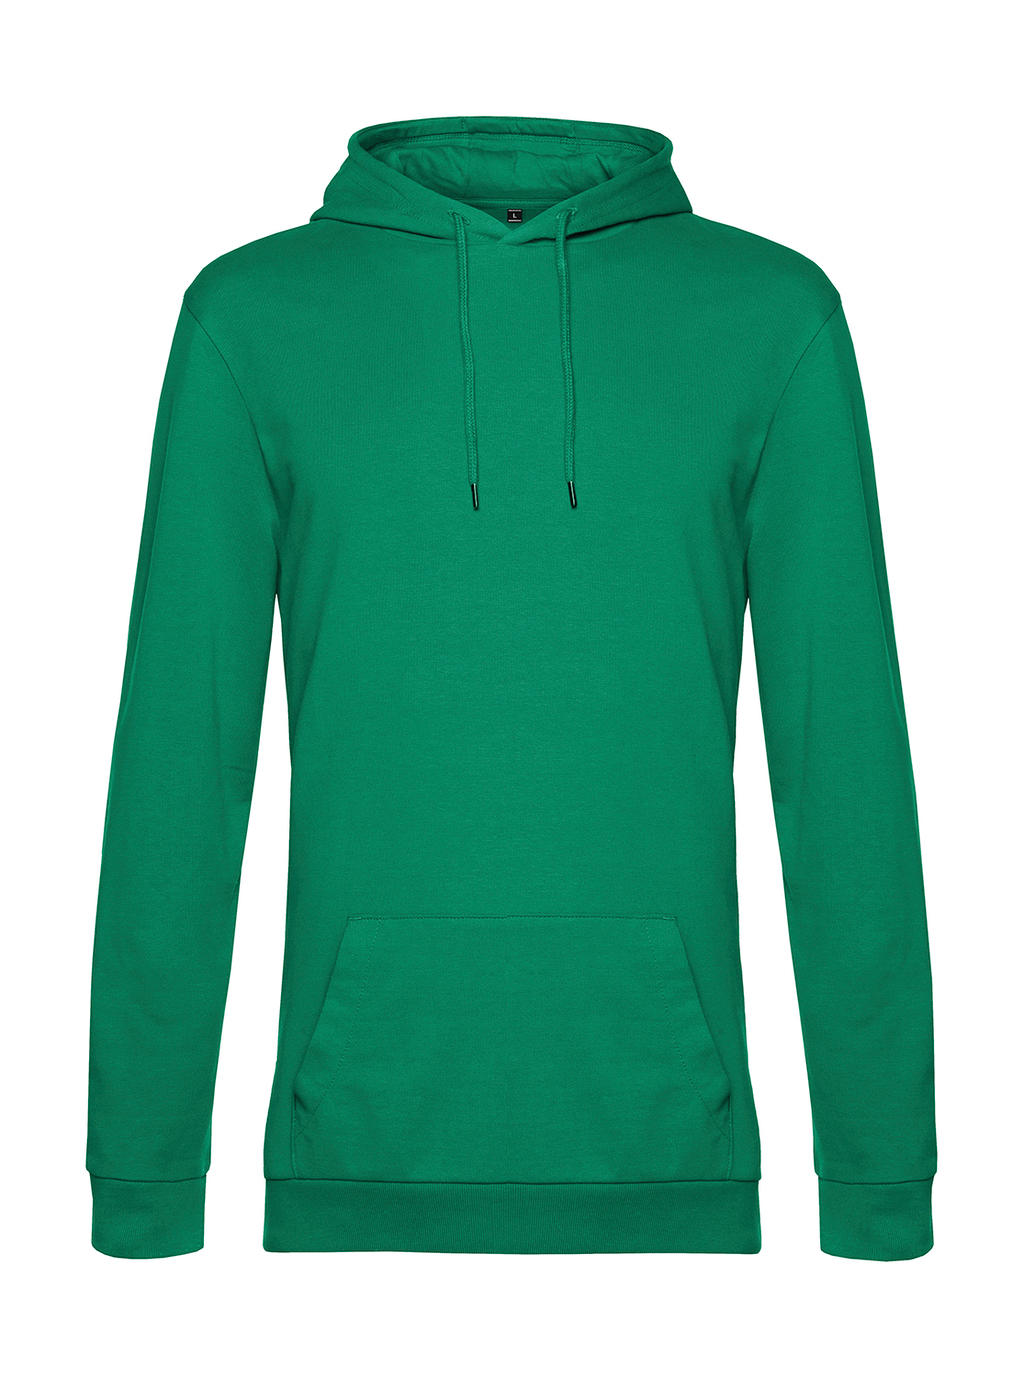 Mikina s kapucňou #Hoodie French Terry - kelly green